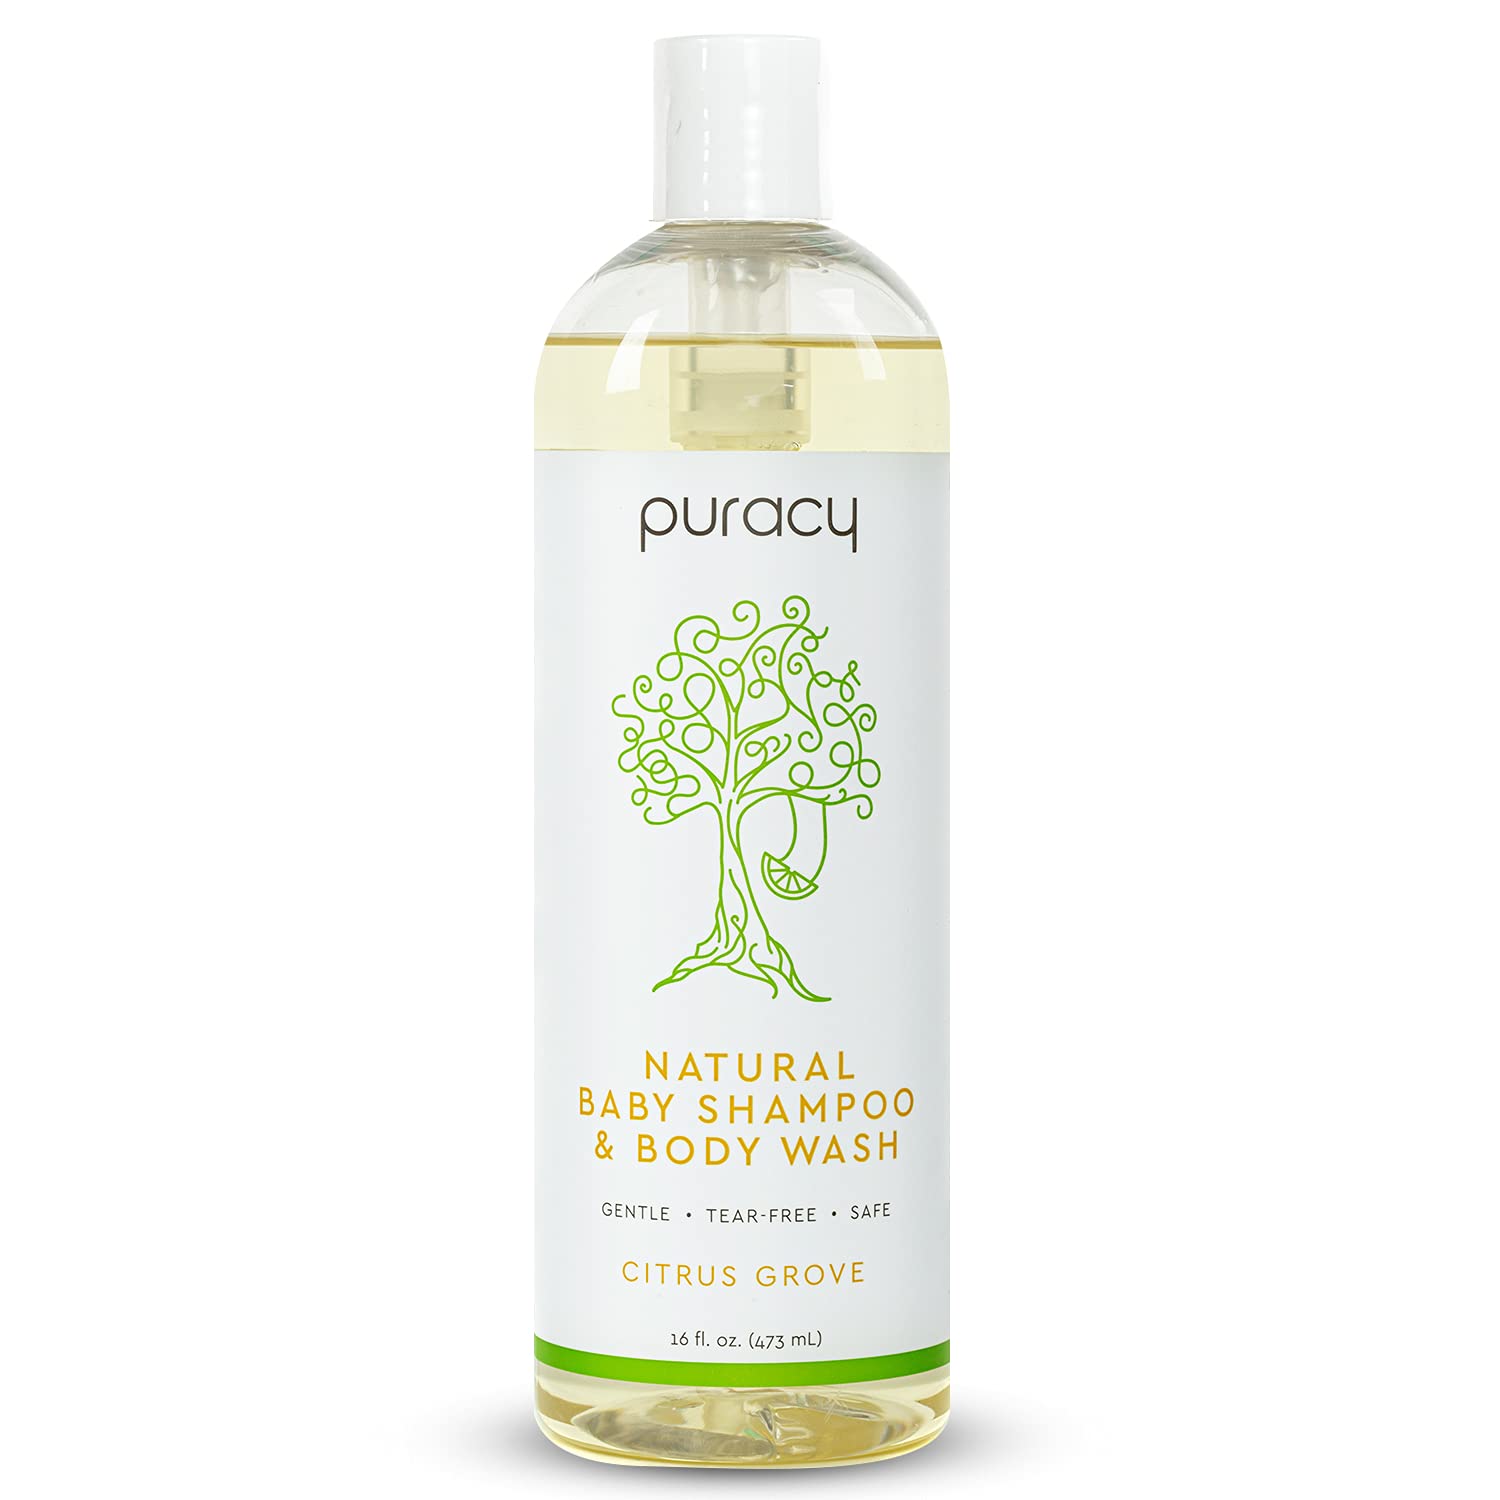 Puracy Natural Baby Stain Remover Free & Clear / 16oz